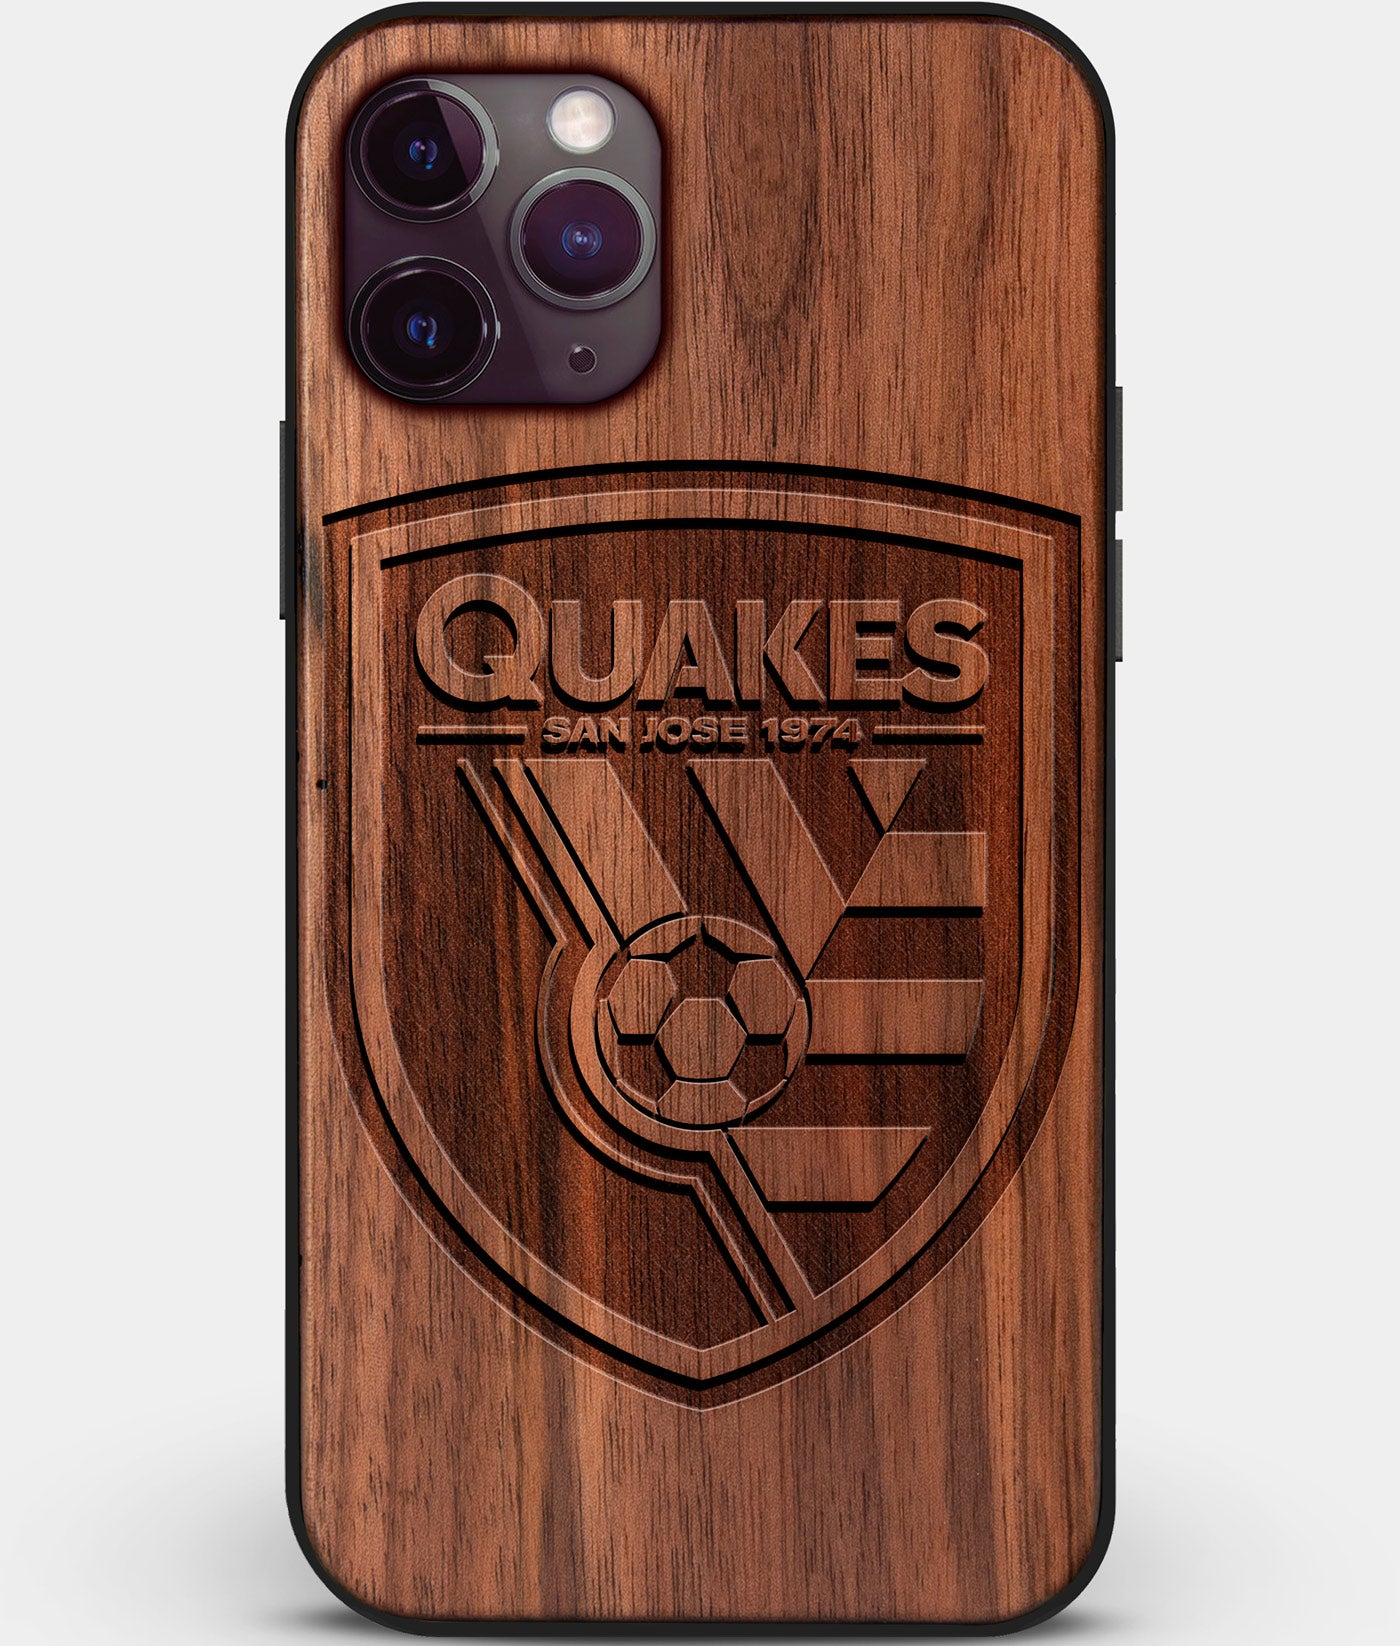 Custom Carved Wood San Jose Earthquakes iPhone 11 Pro Case | Personalized Walnut Wood San Jose Earthquakes Cover, Birthday Gift, Gifts For Him, Monogrammed Gift For Fan | by Engraved In Nature